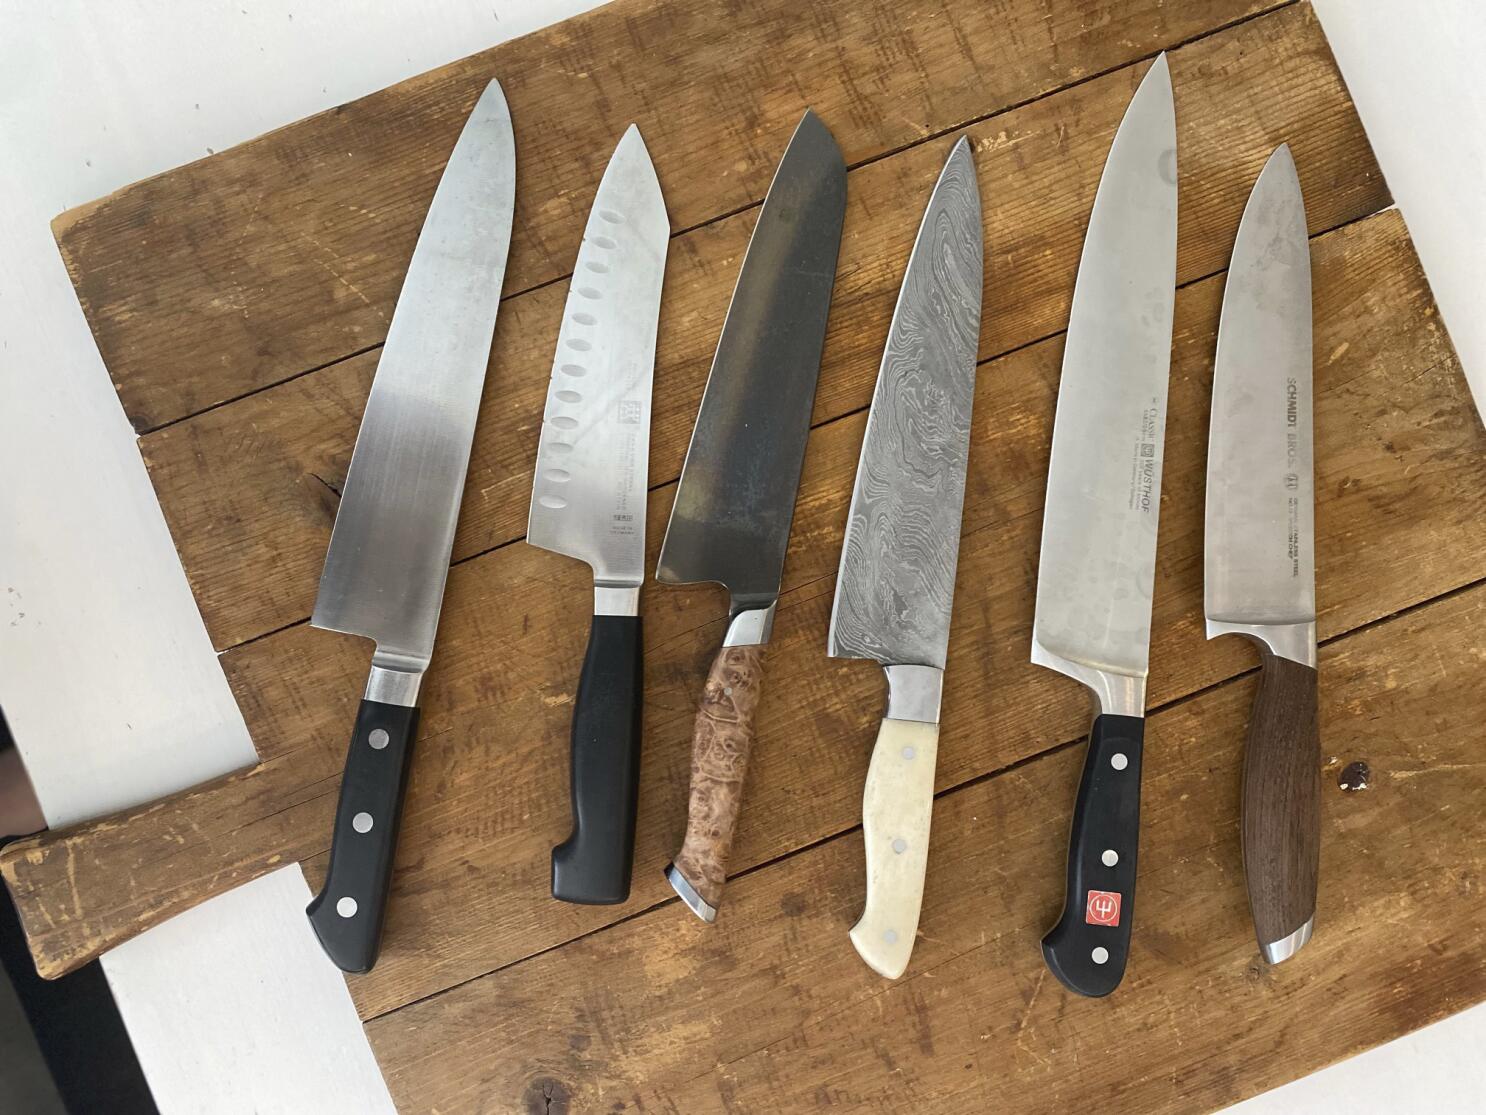 Slice of life: A reporter's search for knives in Beijing